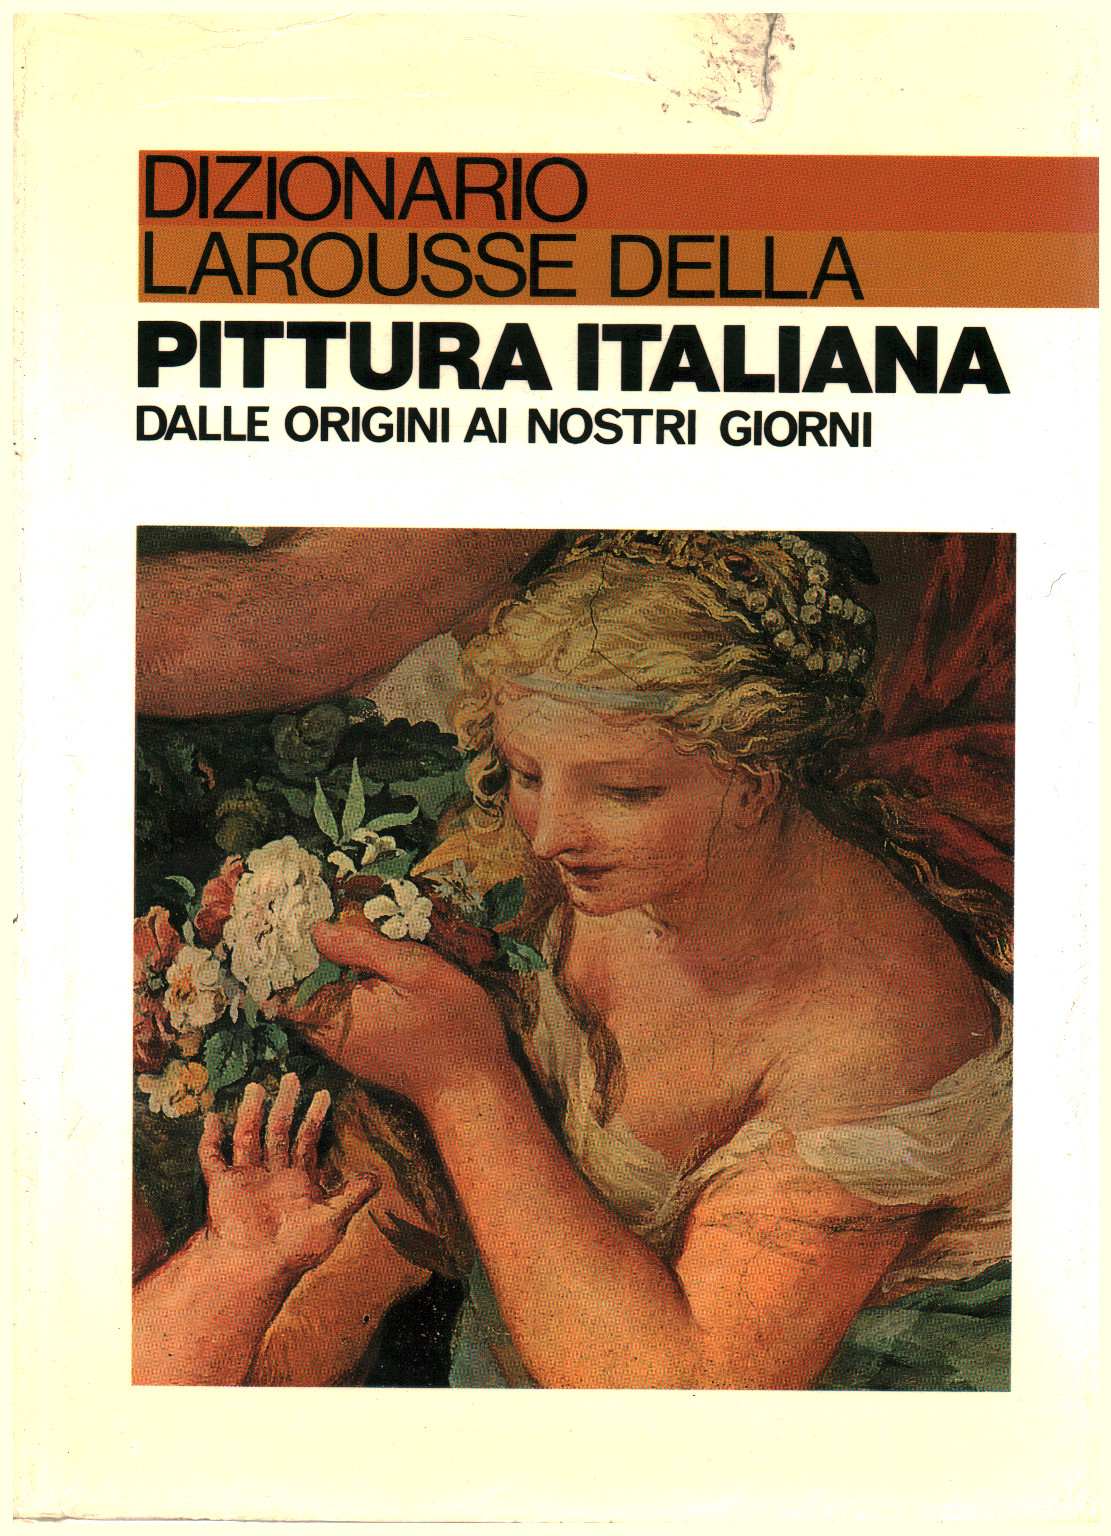 Larousse dictionary of Italian painting, s.a.